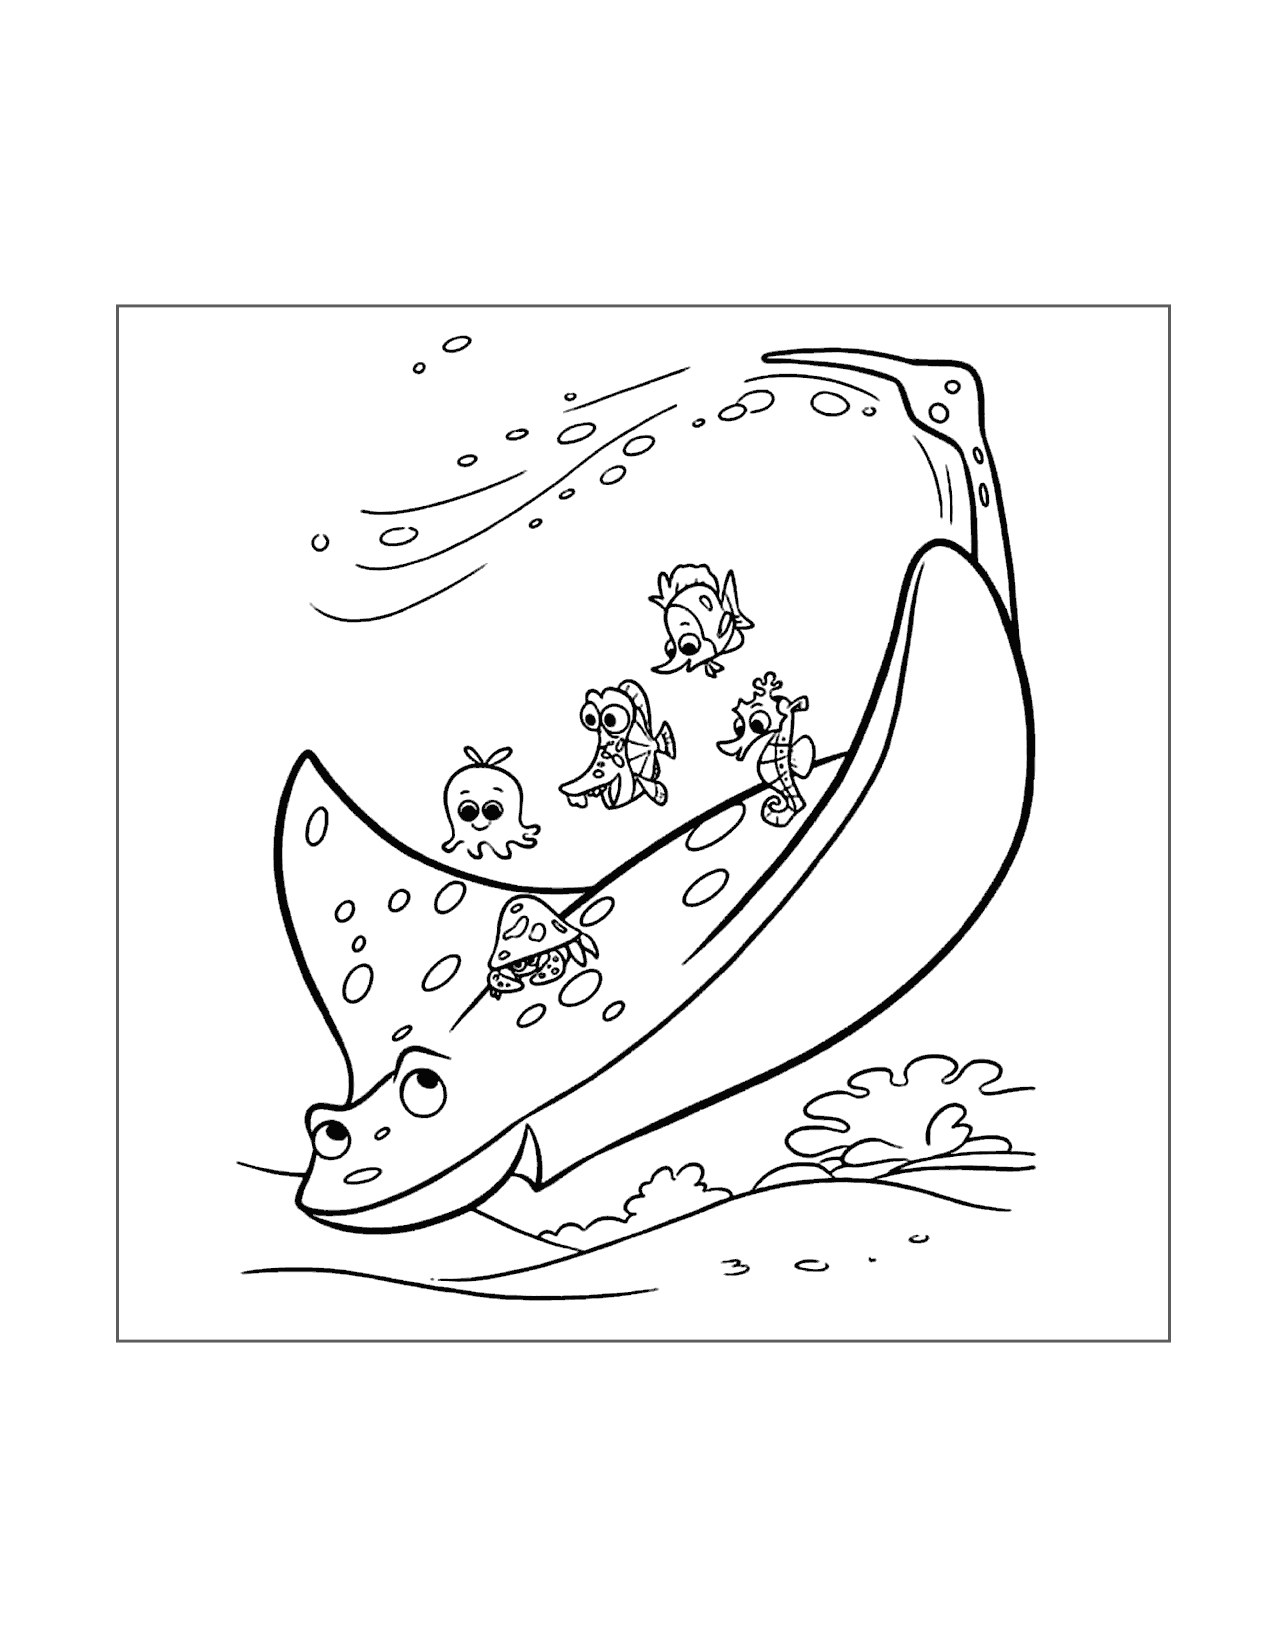 Stingray Teaches About Migration Finding Dory Coloring Page